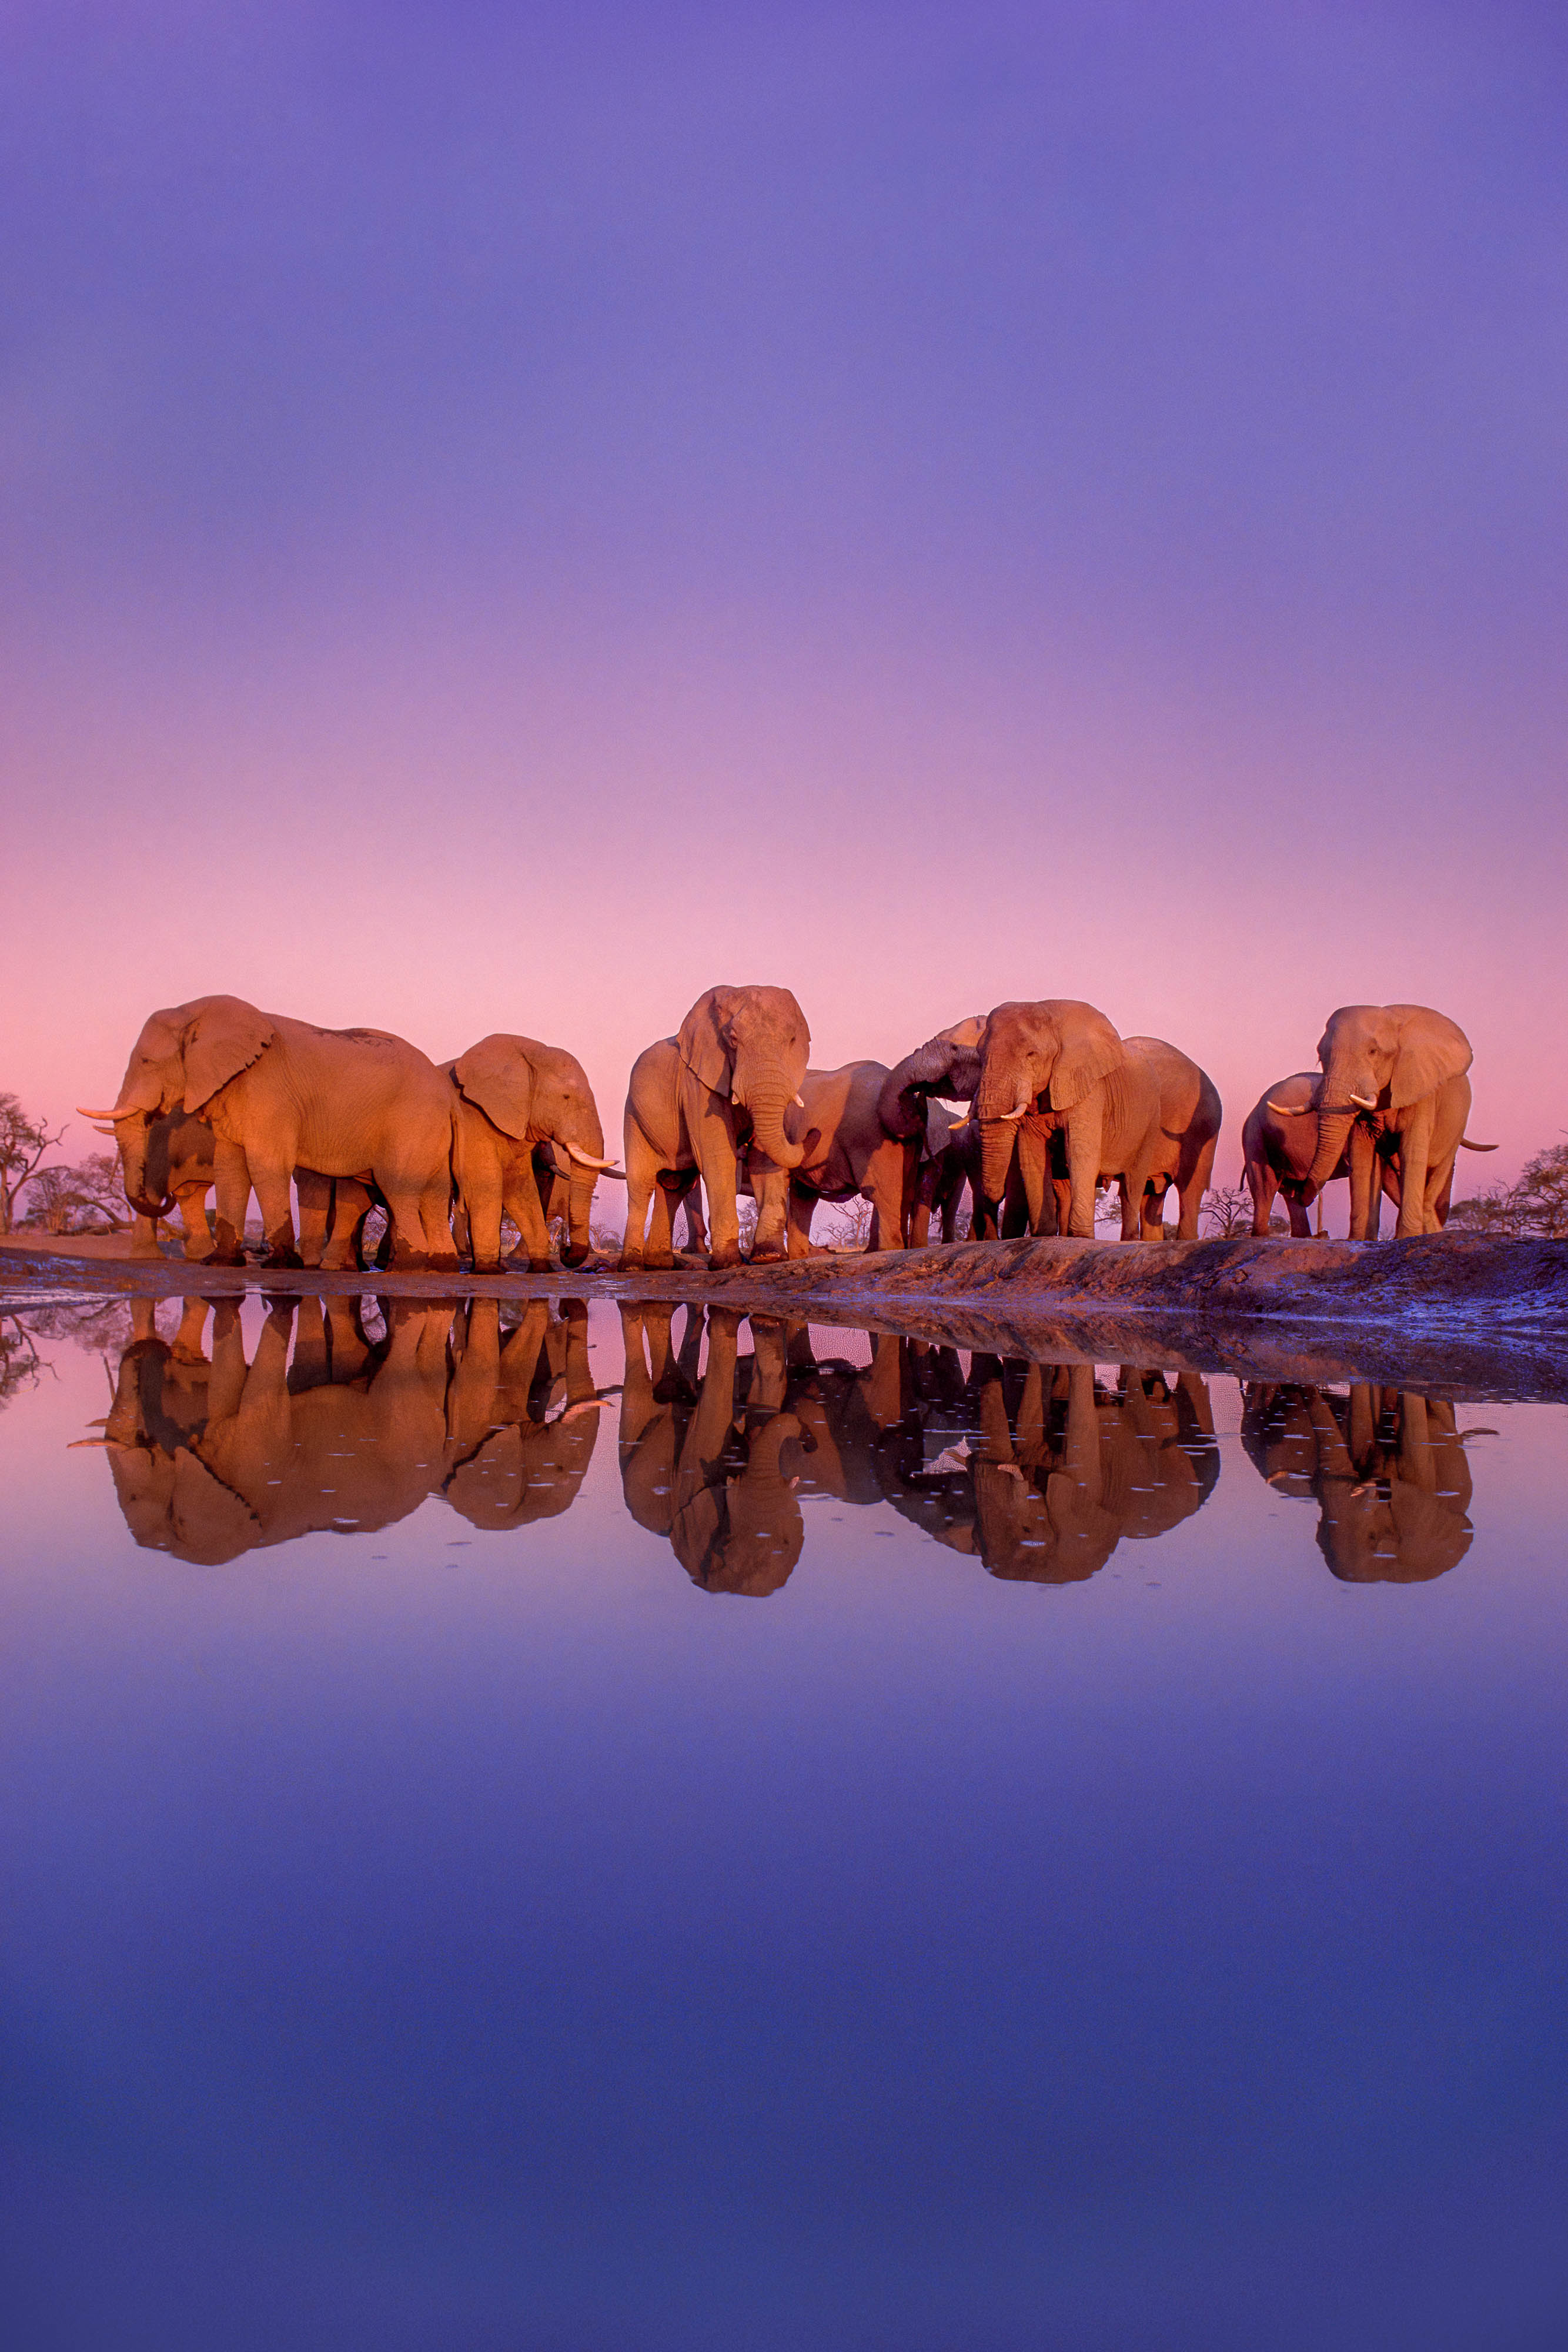 Photo of a dozen African elephants at sunset, their images reflected in a pool of water.